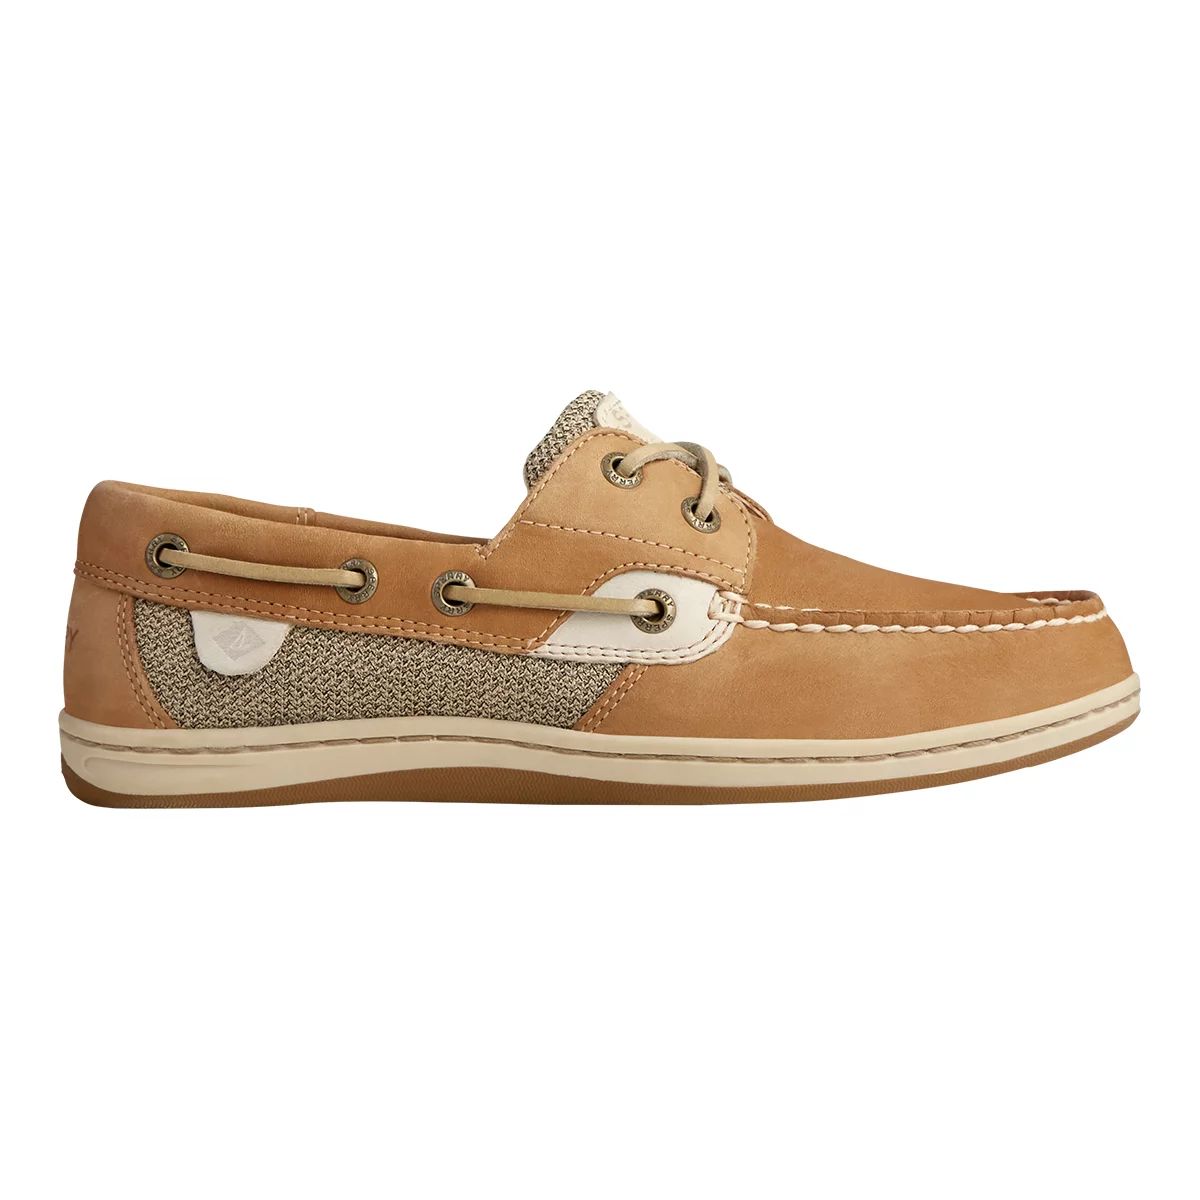 Image of Sperry Women's Koifish Boat Shoes - Linen Oat